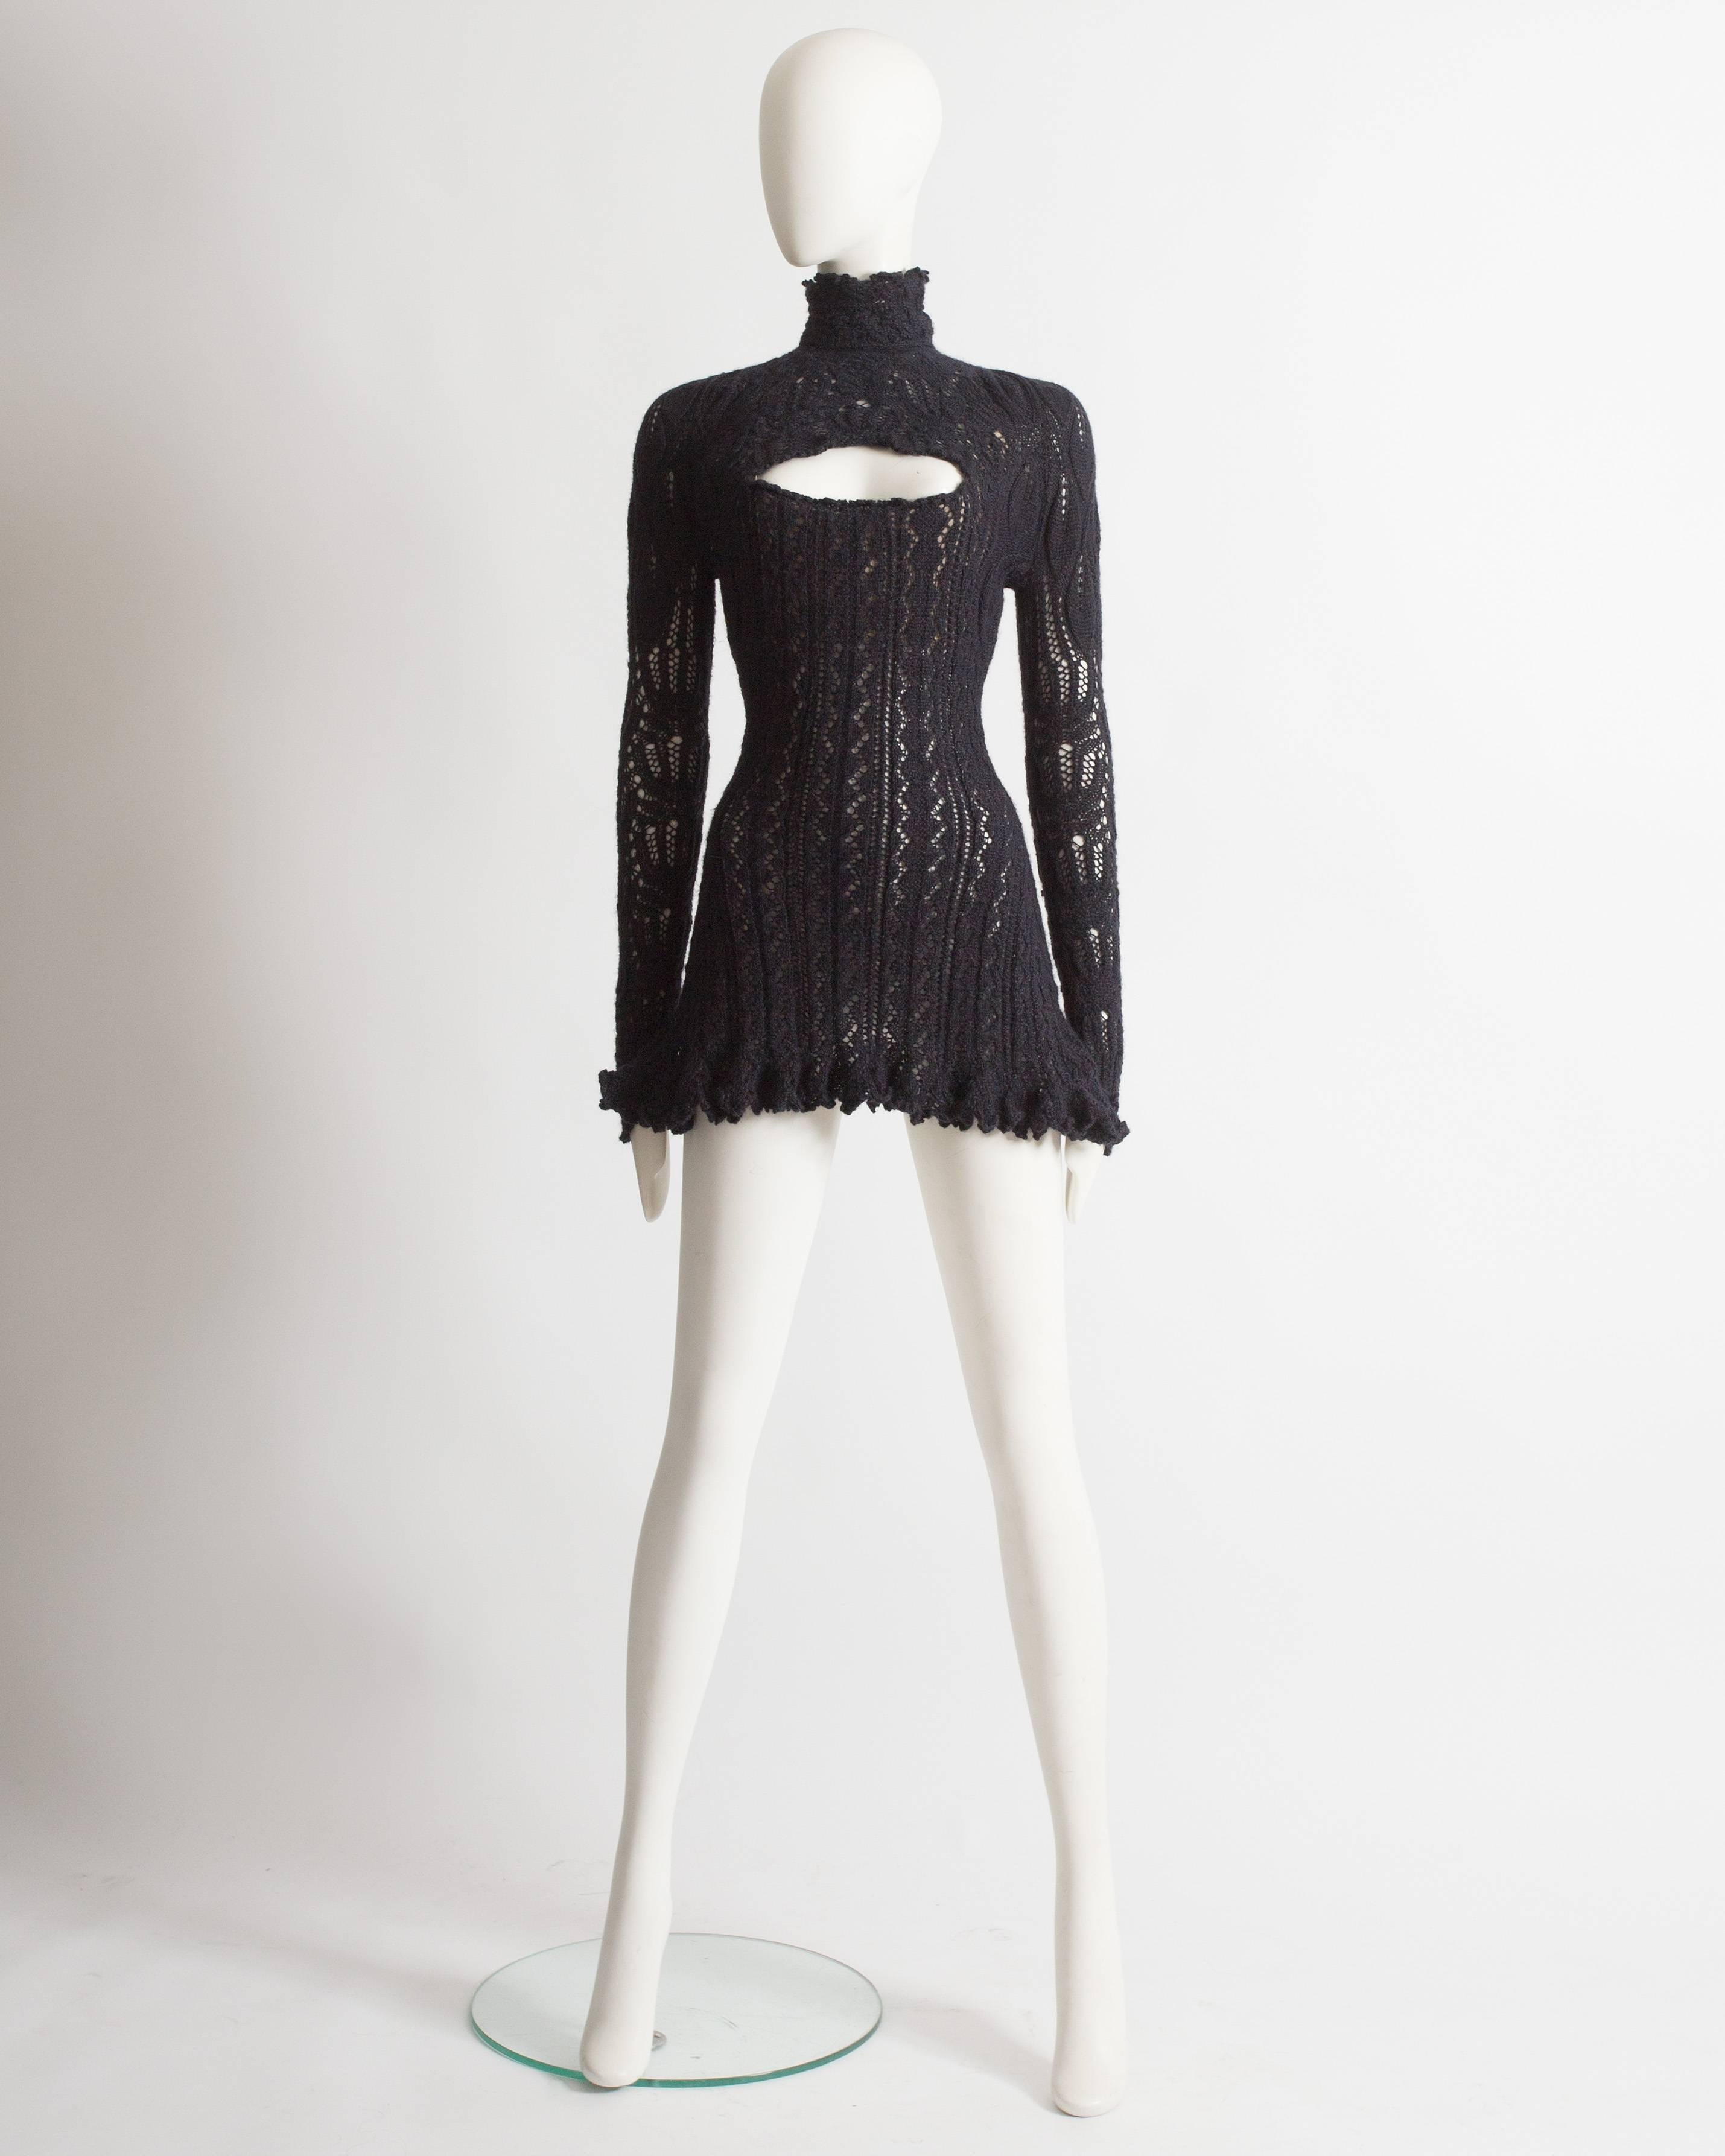 Rare Vivienne Westwood crochet knit mini dress. Internal corset with boning, scalloped hem on the skirt, and collar, cutout on the bust and zip closure at the rear.

Autumn-Winter 1993